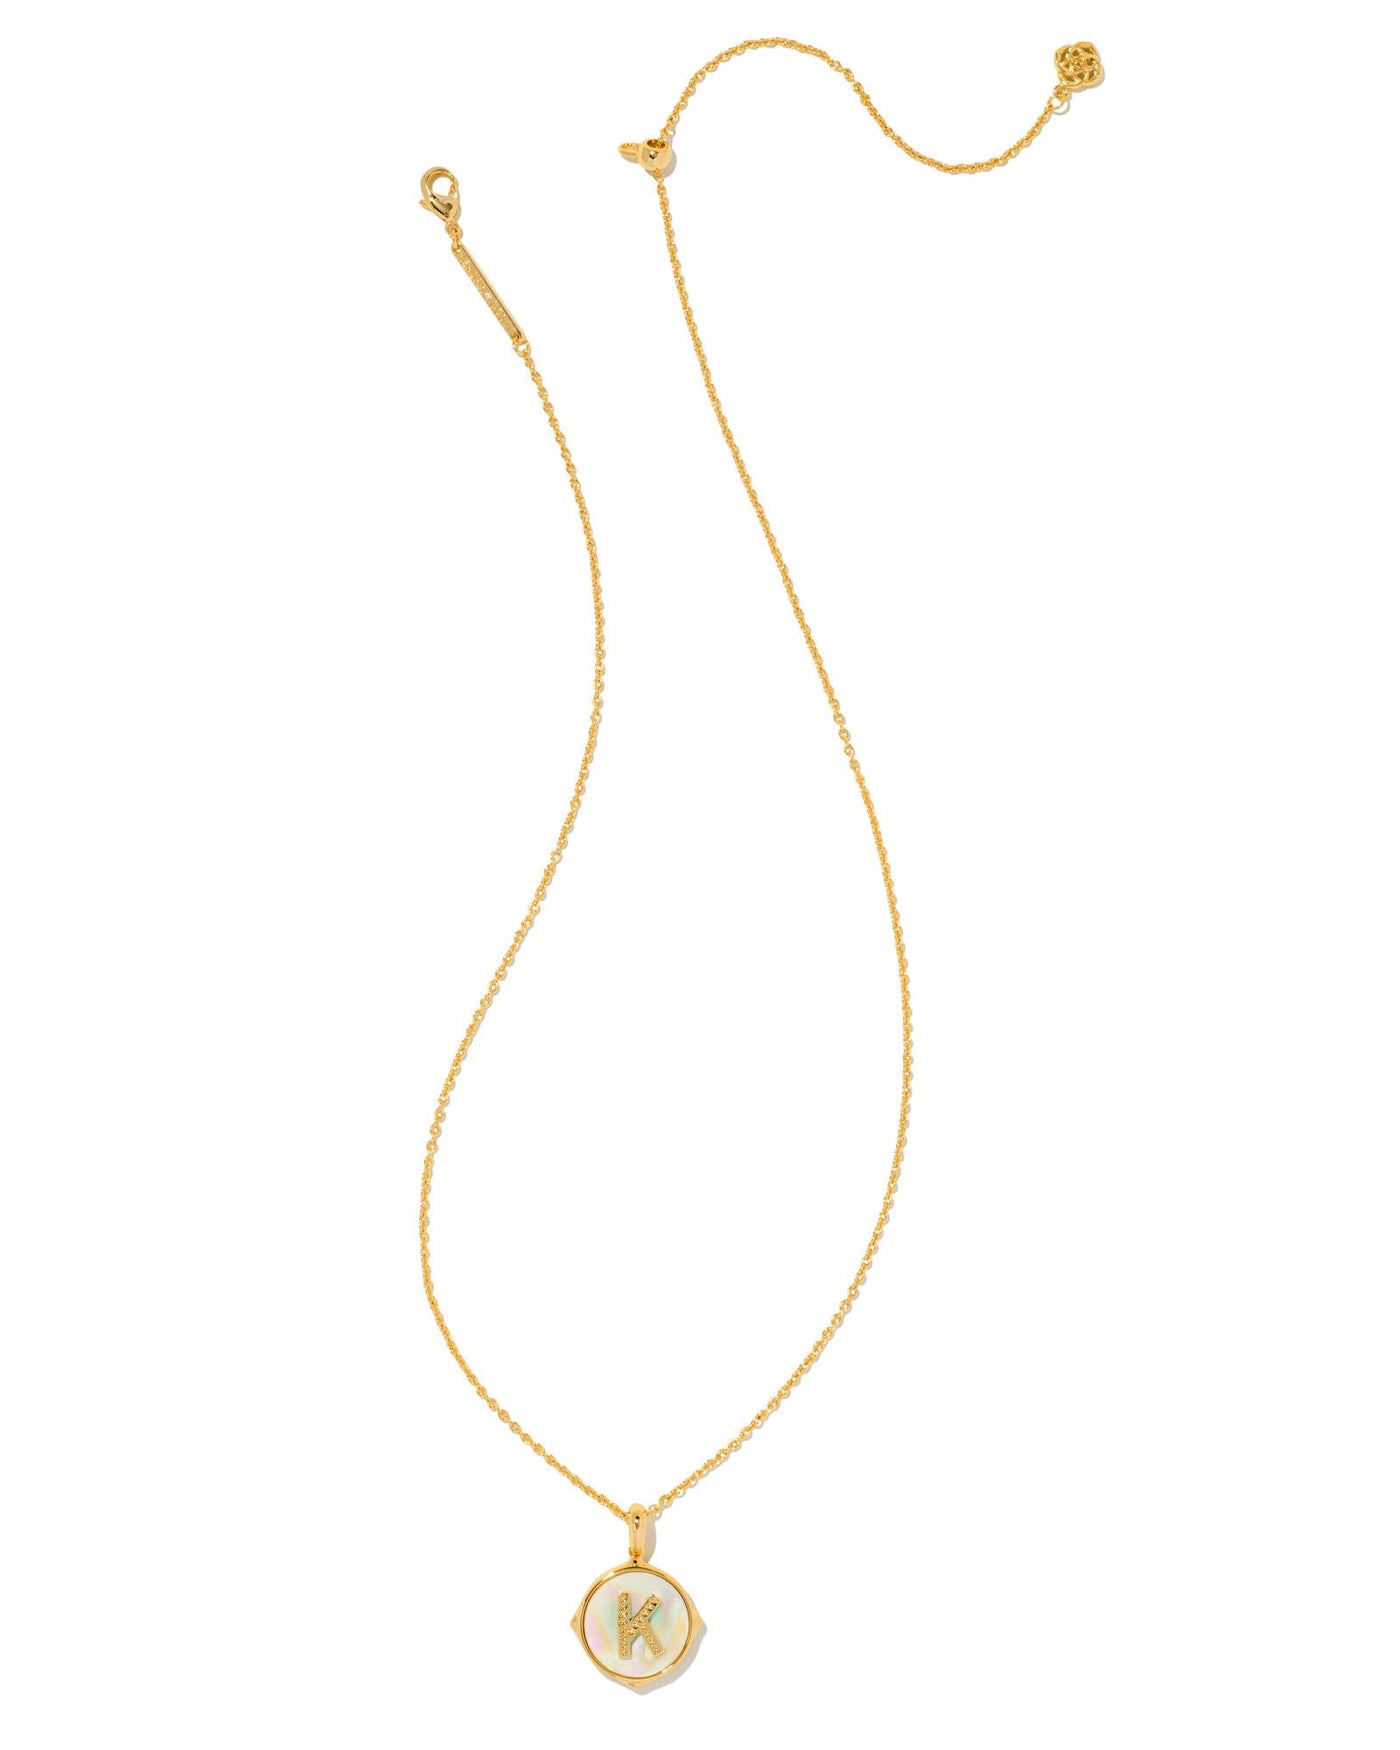 Kendra Scott The Letter K Disc Pendant Necklace in Iridescent Abalone-Necklaces-Kendra Scott-Market Street Nest, Fashionable Clothing, Shoes and Home Décor Located in Mabank, TX